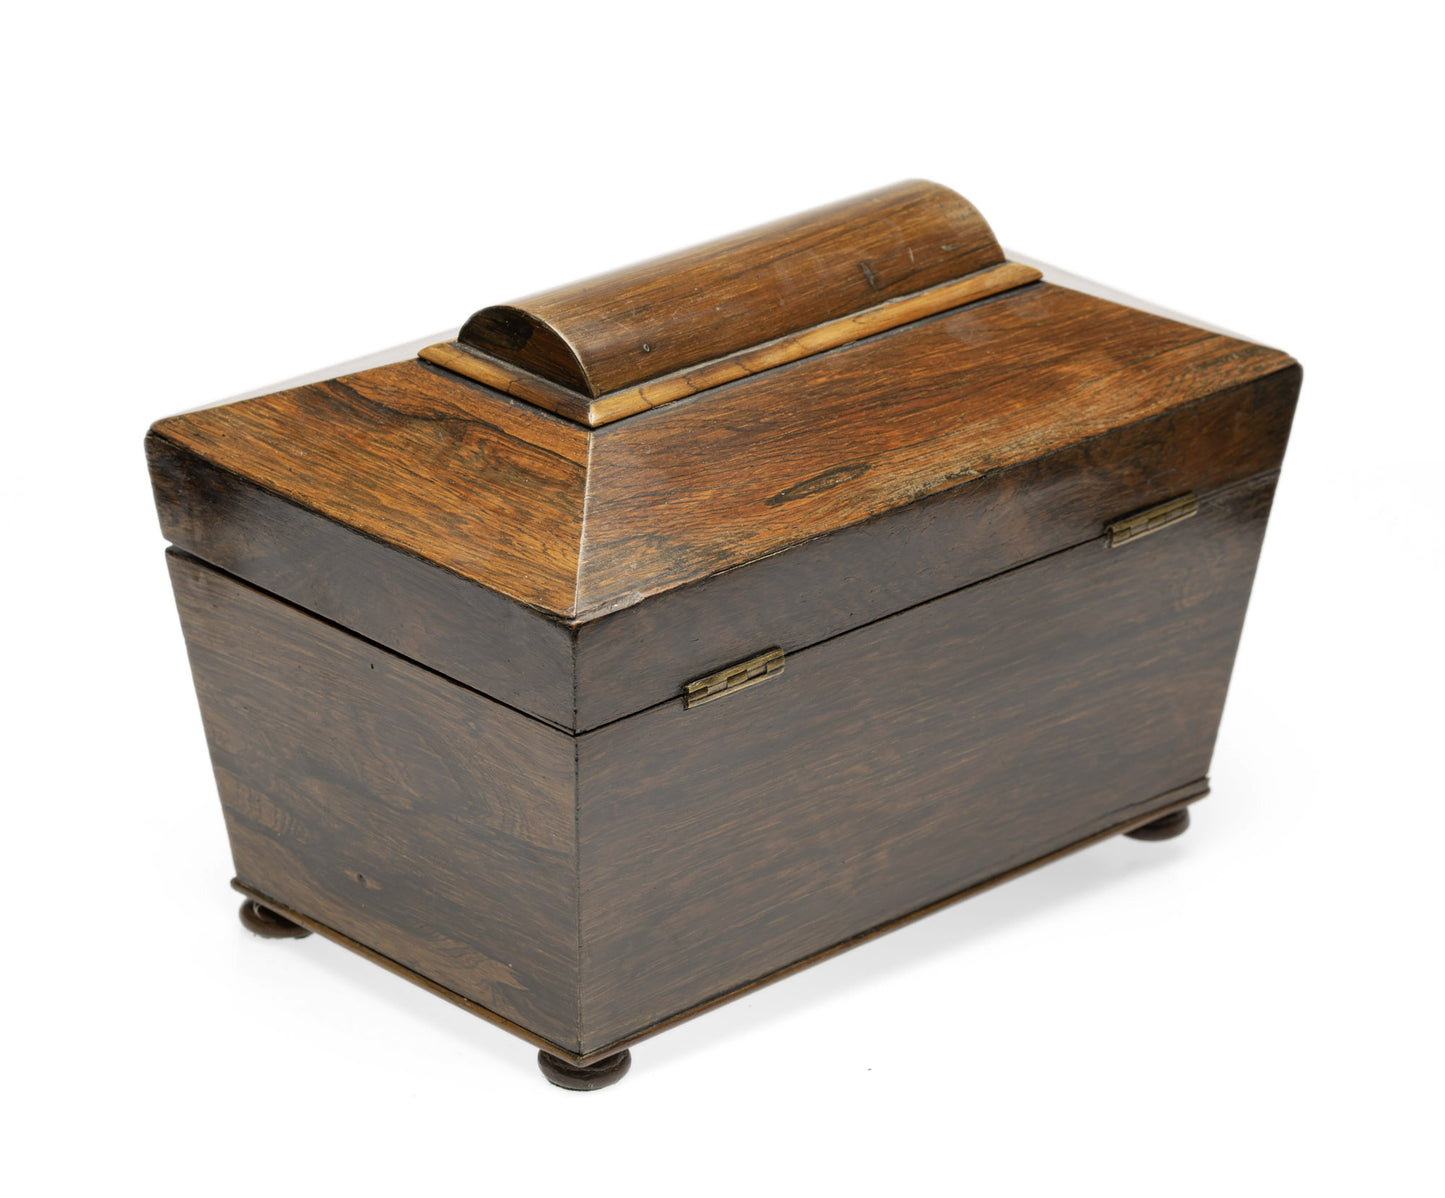 Victorian Antique Wooden Two Division Sarcophagus Tea Caddy with Internal Caddies (Code 2595)